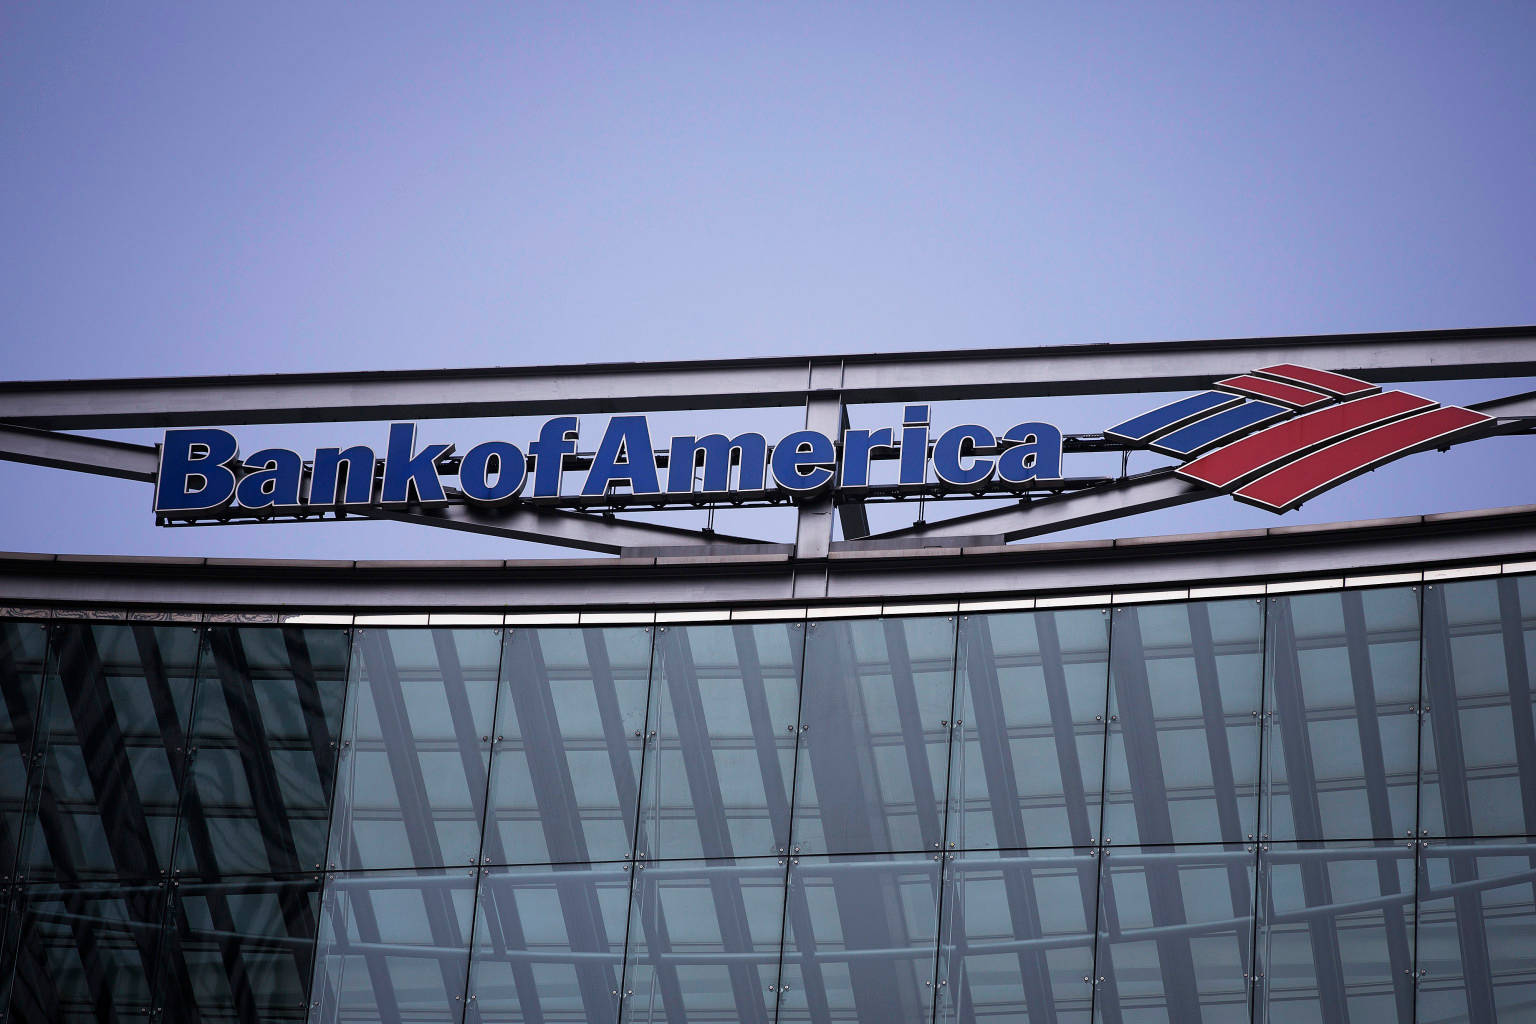 Bank Of America Roof Lettering Signage Wallpaper